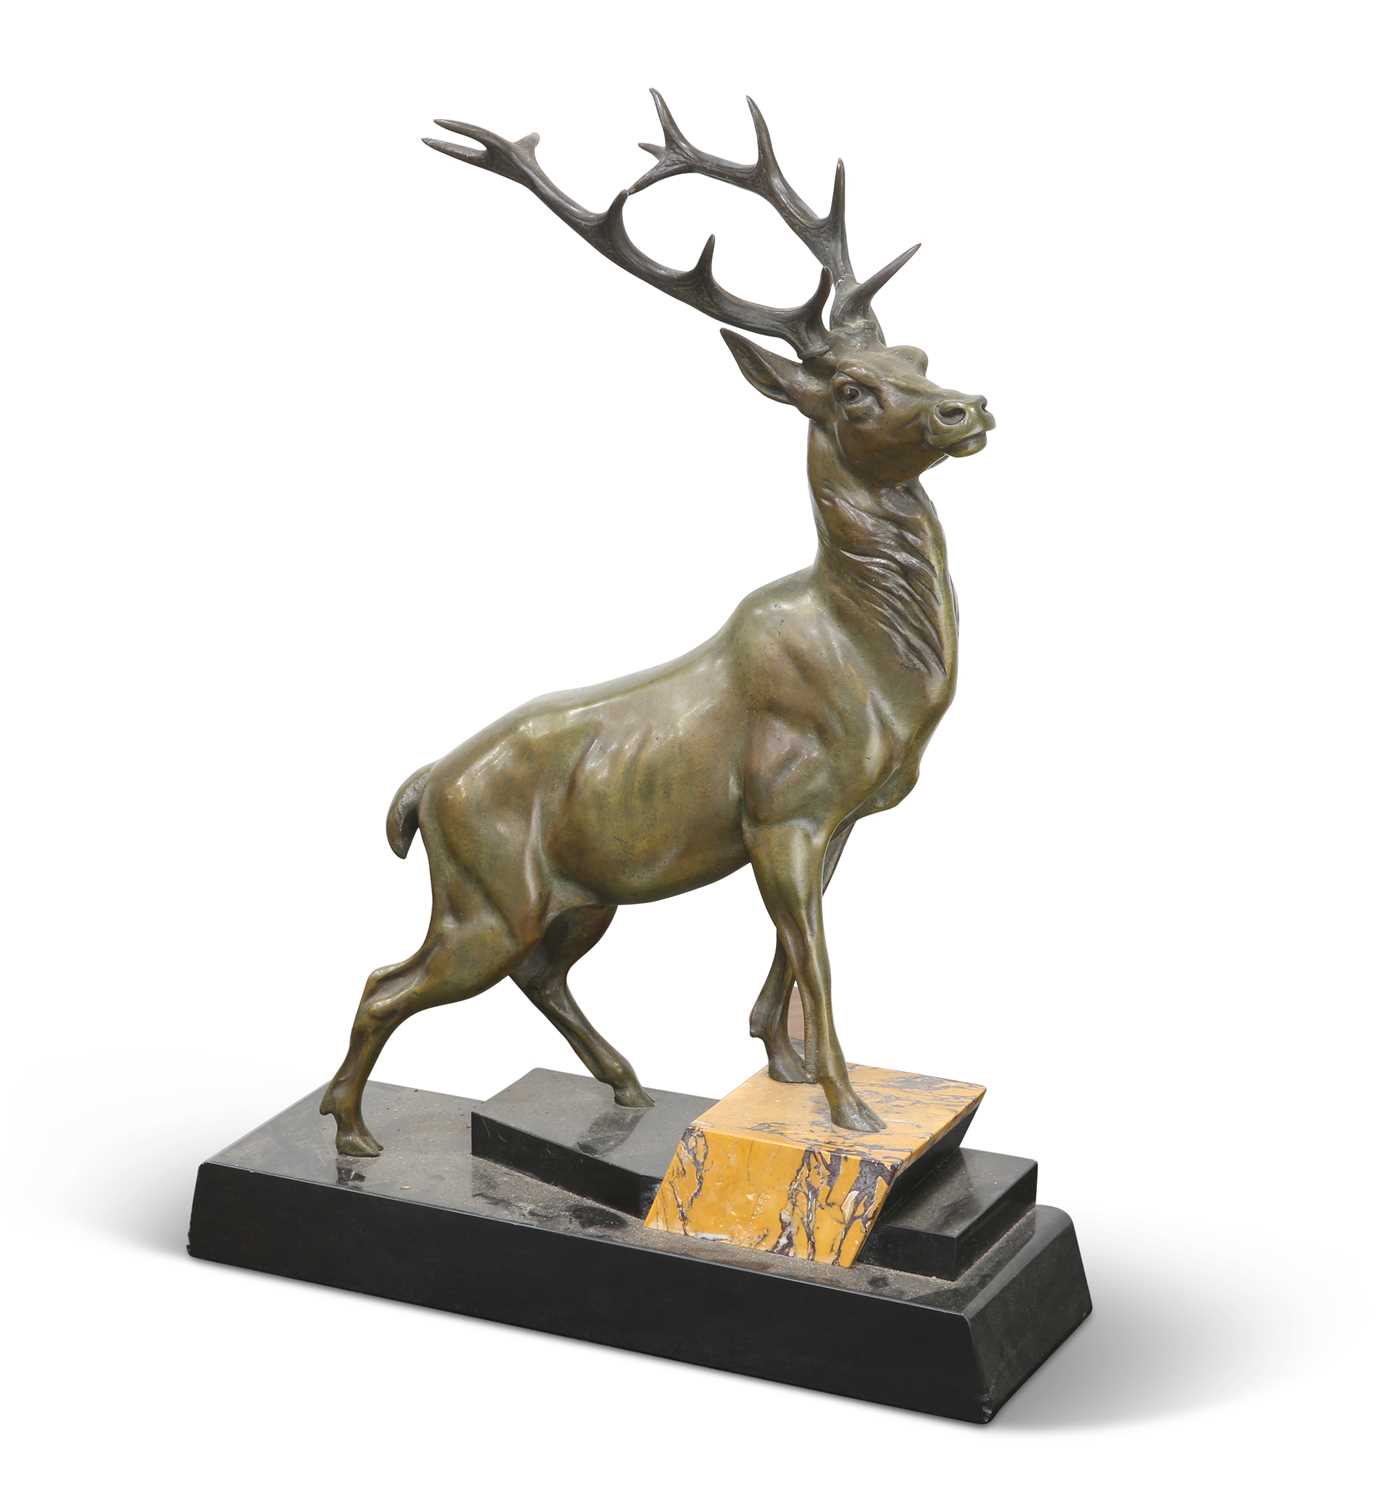 AN ART DECO PERIOD BRONZE OF A STAG